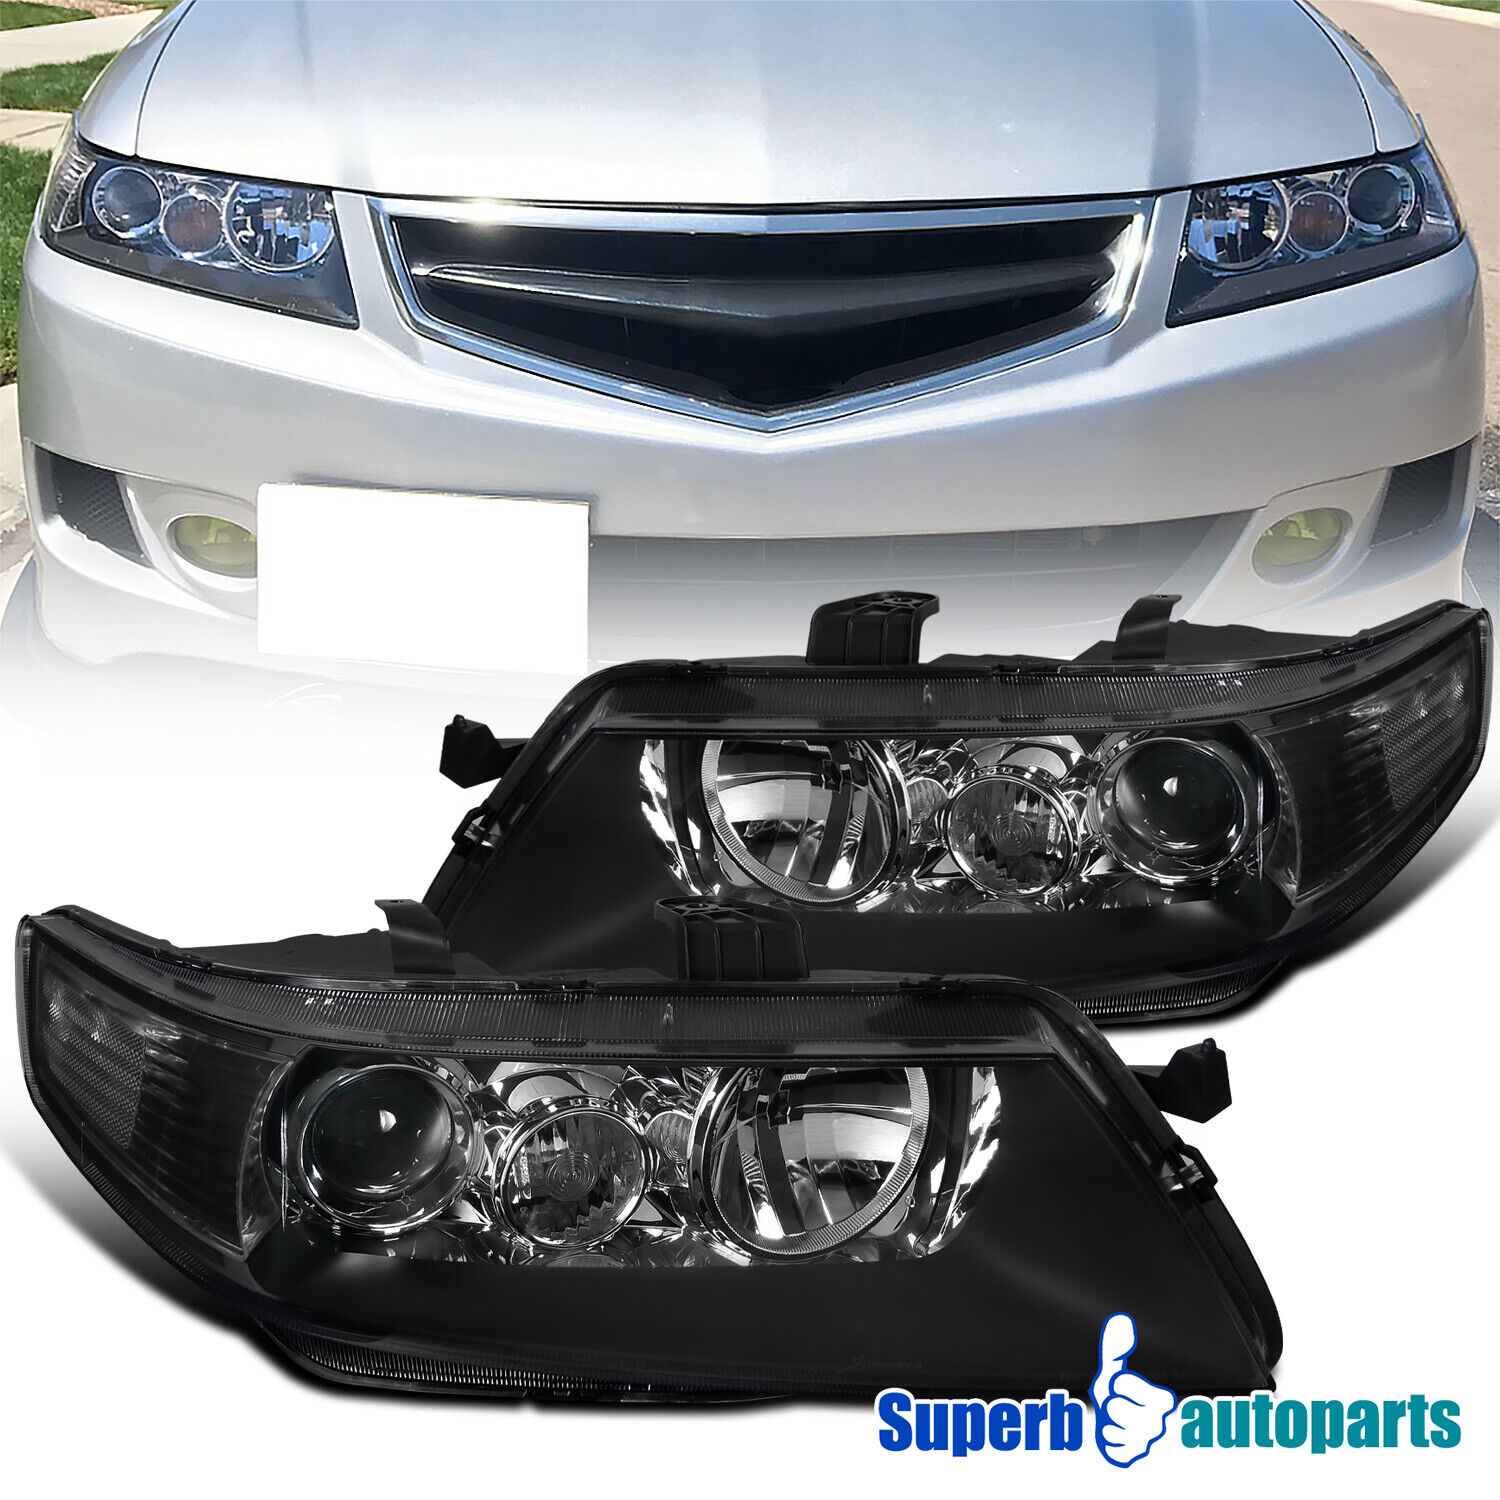 Fits 2004-2005 Acura TSX Headlights Projector Head Lamp Black 04-05 Replacement